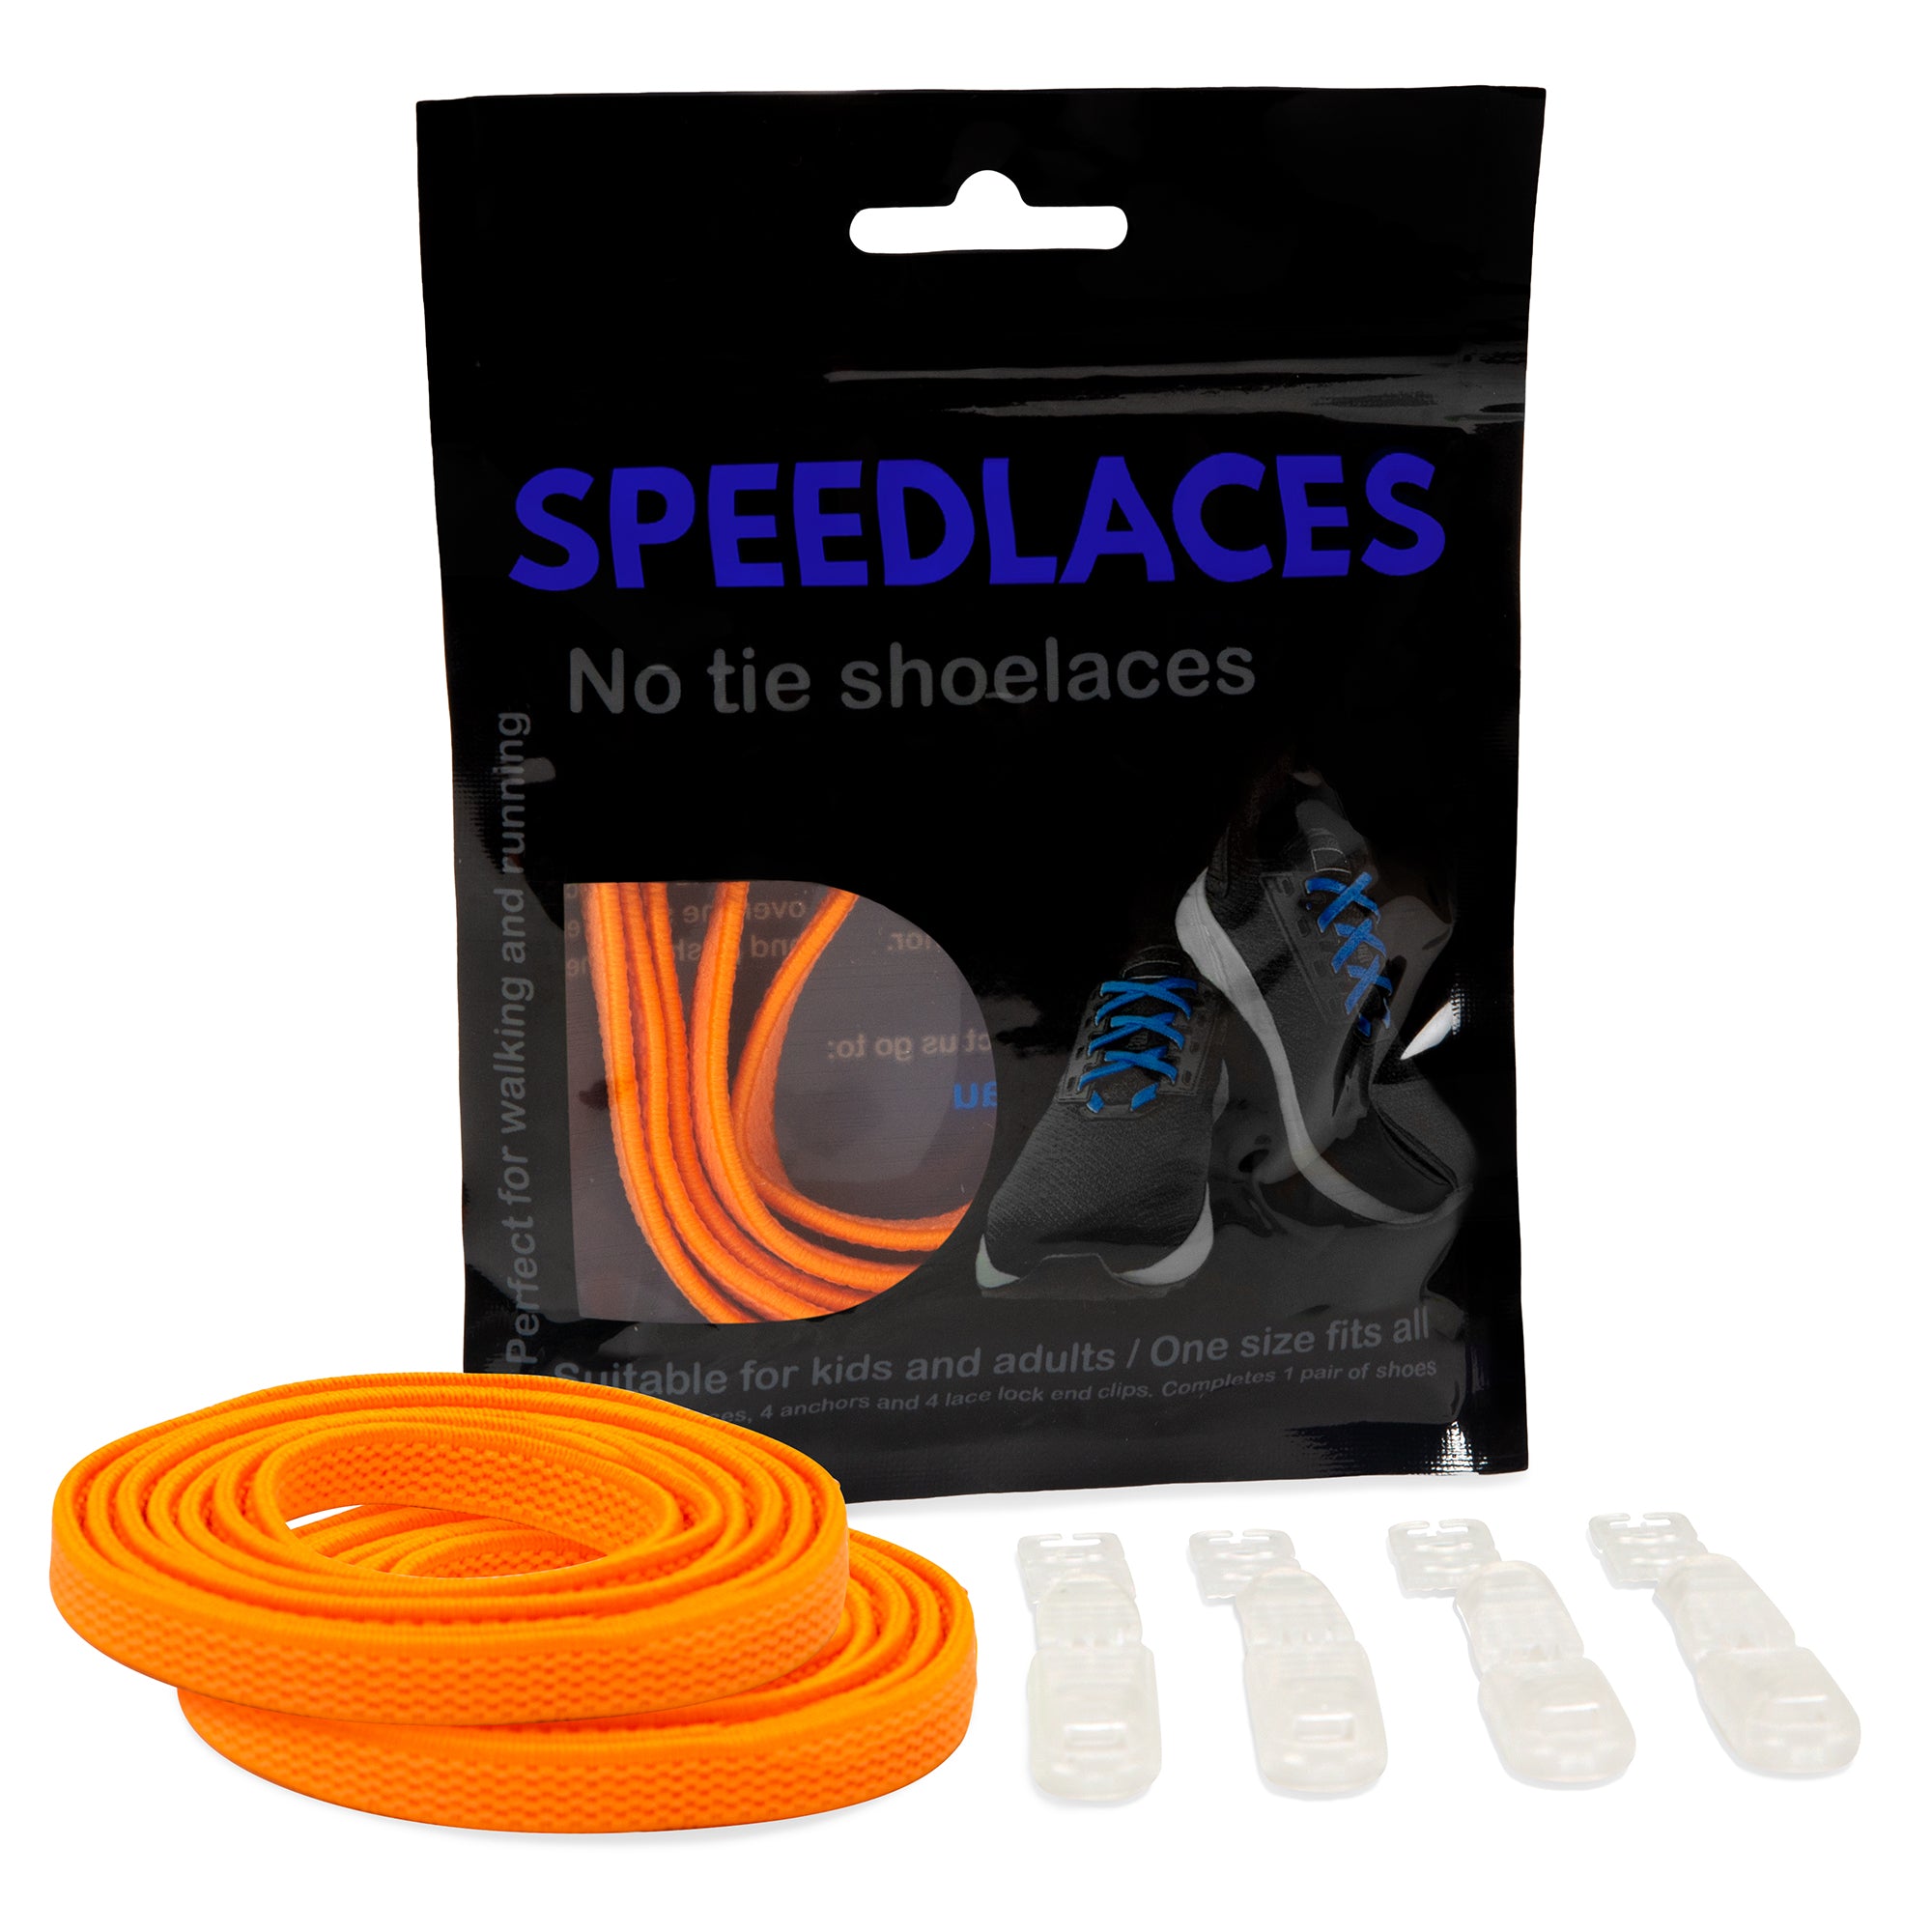 SPEEDLACES No Tie Shoelaces – One Size Fits Adult and Kids Shoes